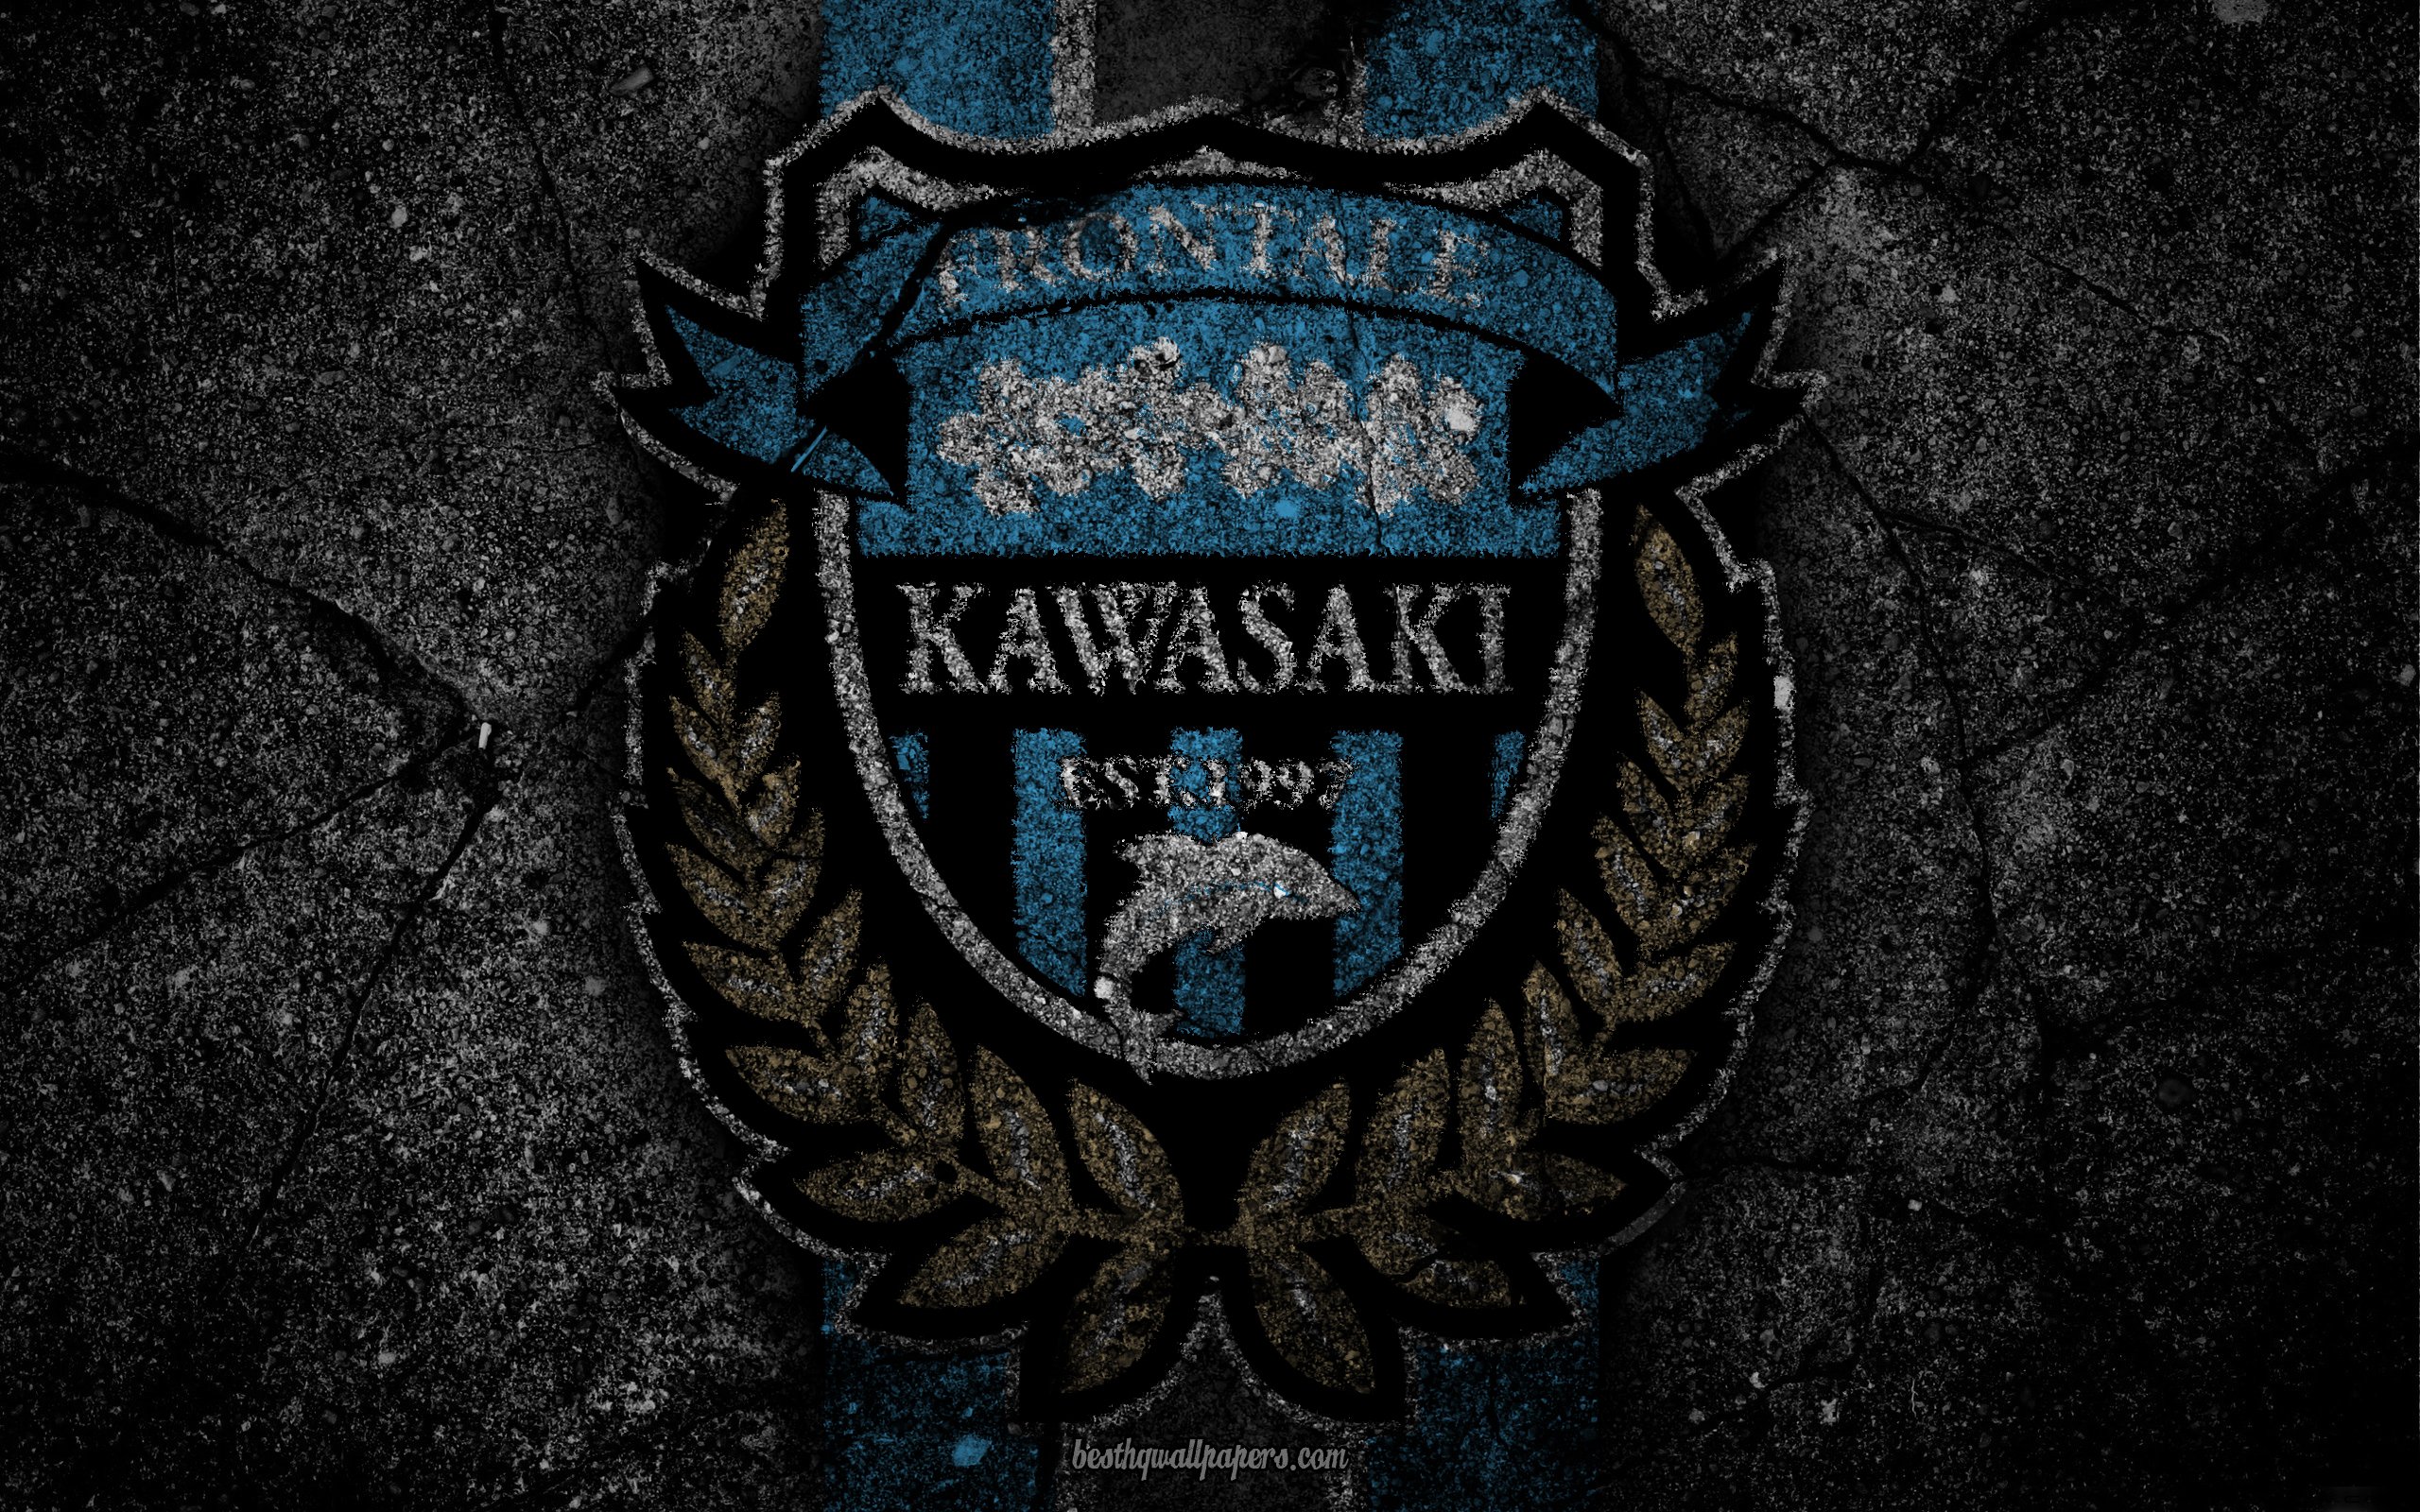 Download Wallpapers Kawasaki Frontale Logo Art J League Soccer Football Club Fc Kawasaki Frontale Asphalt Texture For Desktop With Resolution 2560x1600 High Quality Hd Pictures Wallpapers